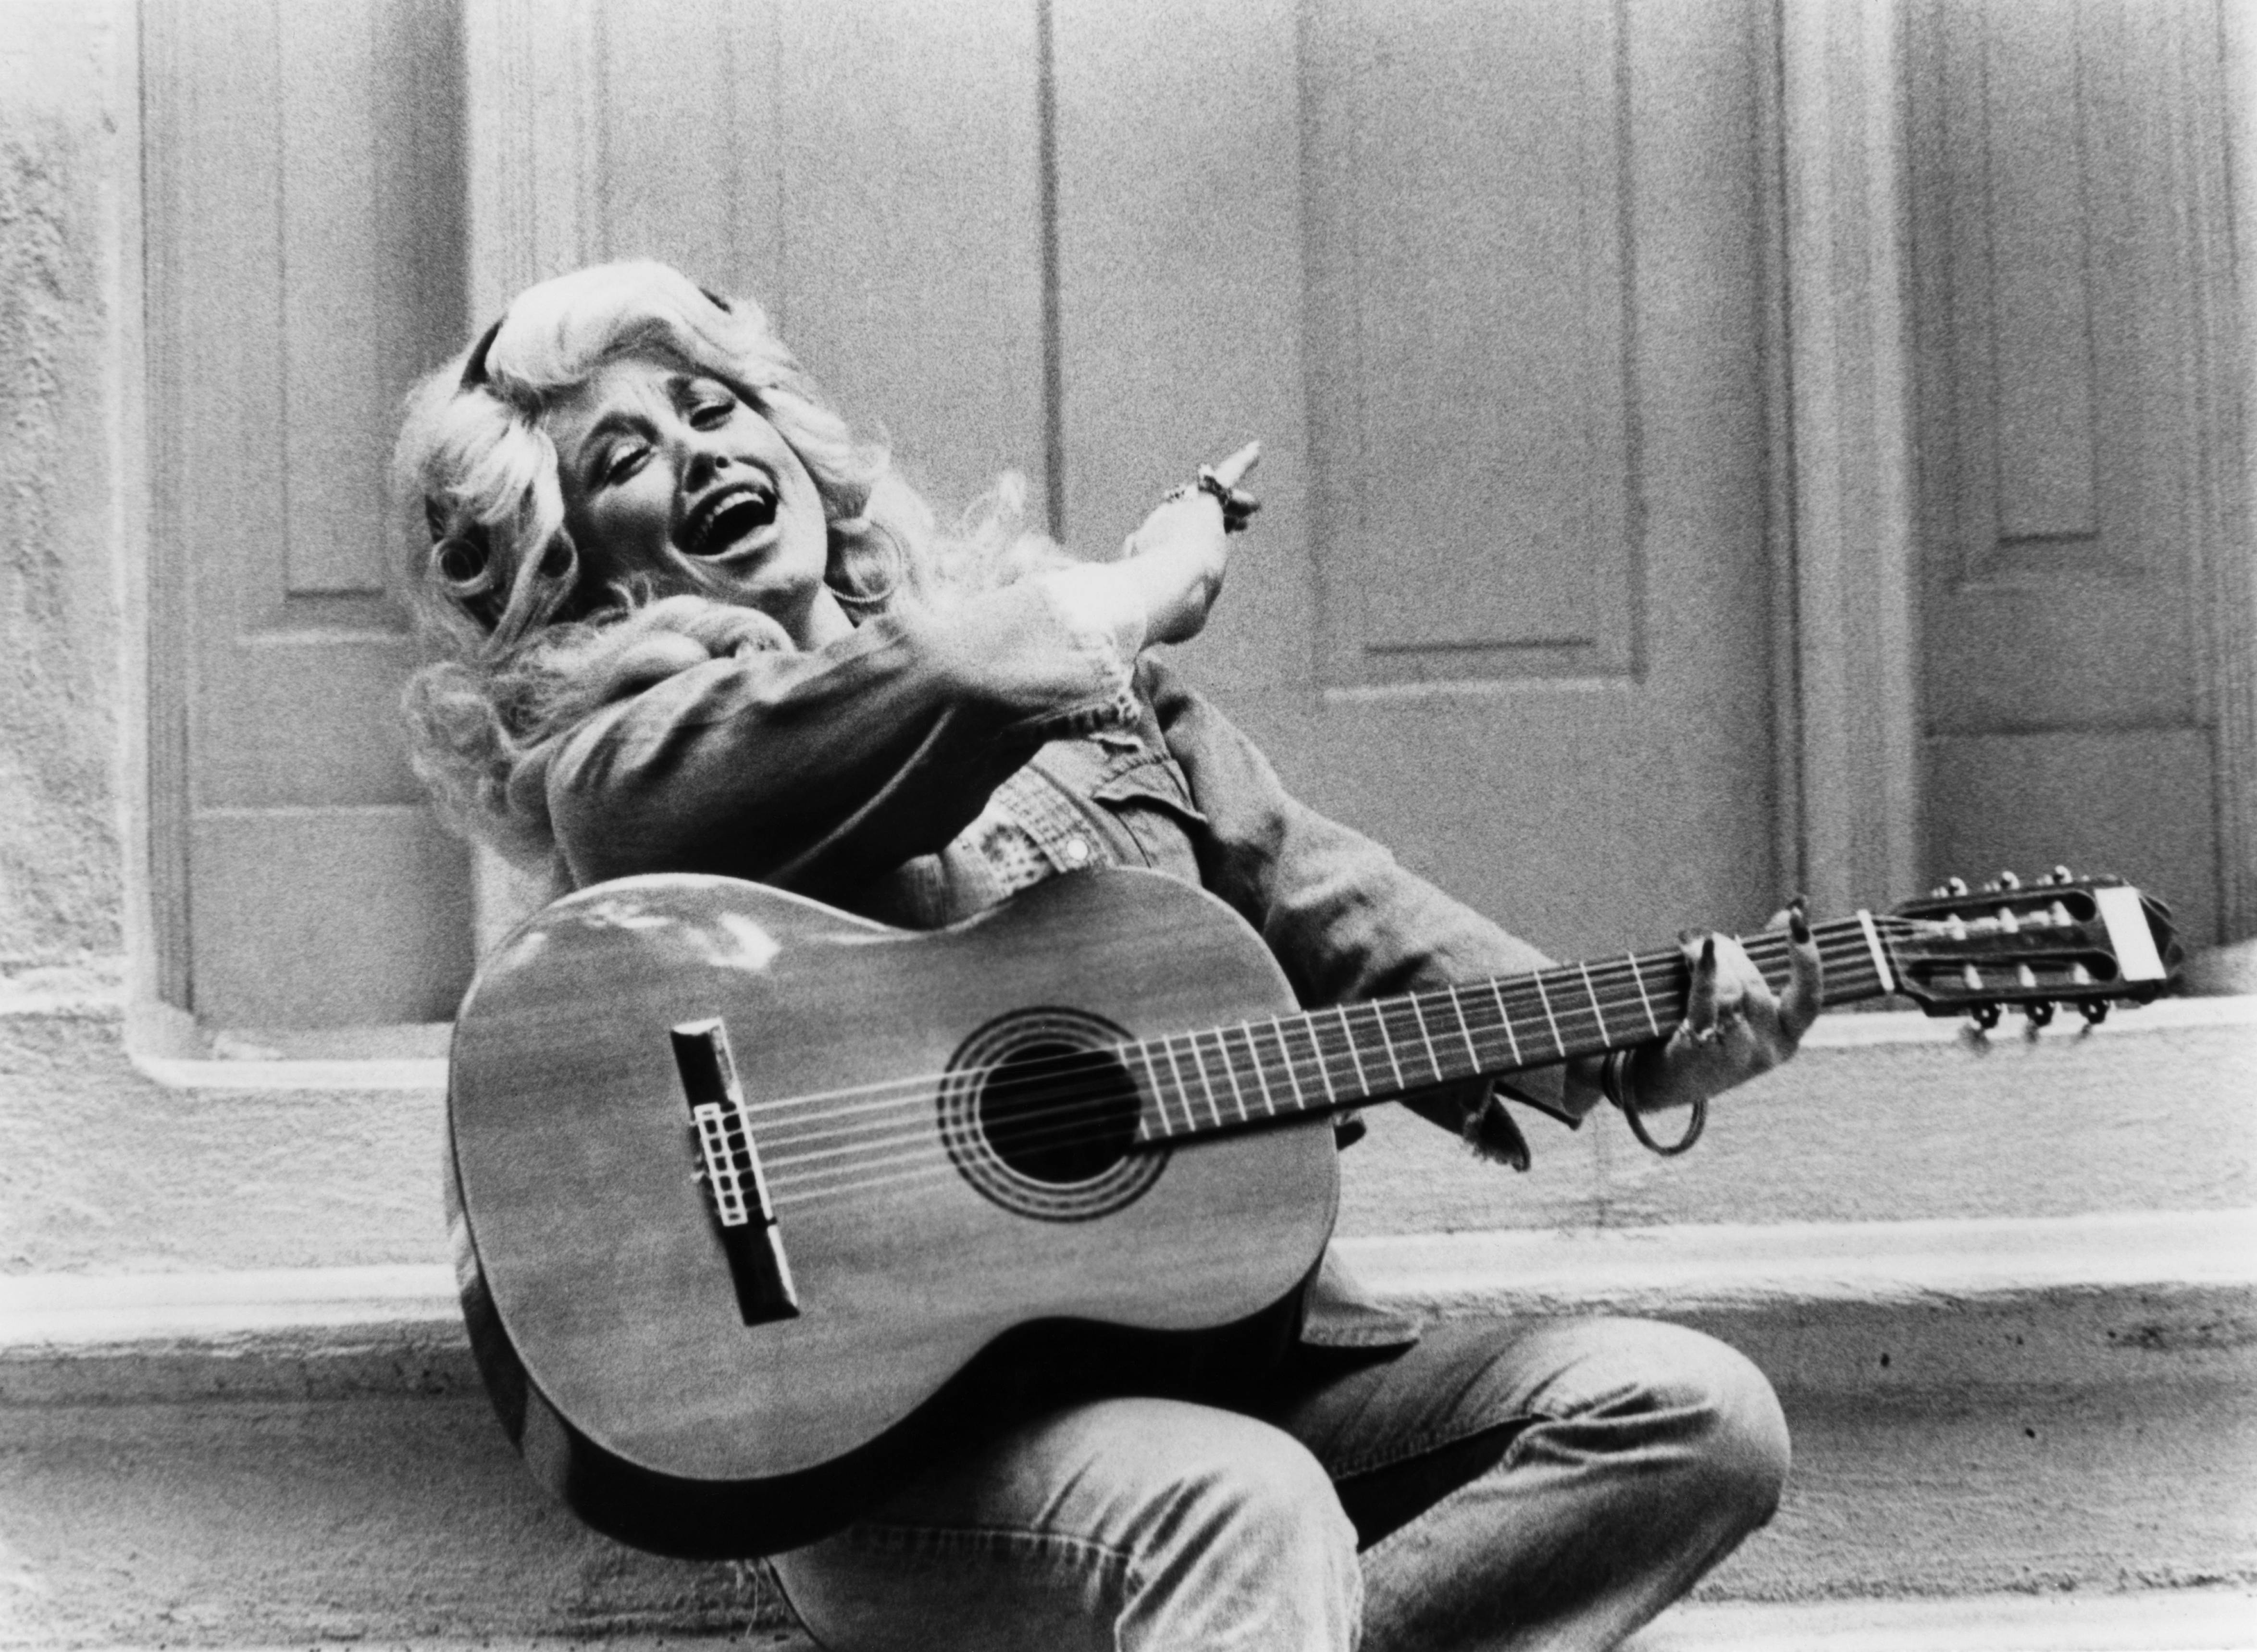 Dolly Parton spiritedly plays the guitar in black and white in 1970. She's wearing her hair big and curl and a jean outfit.